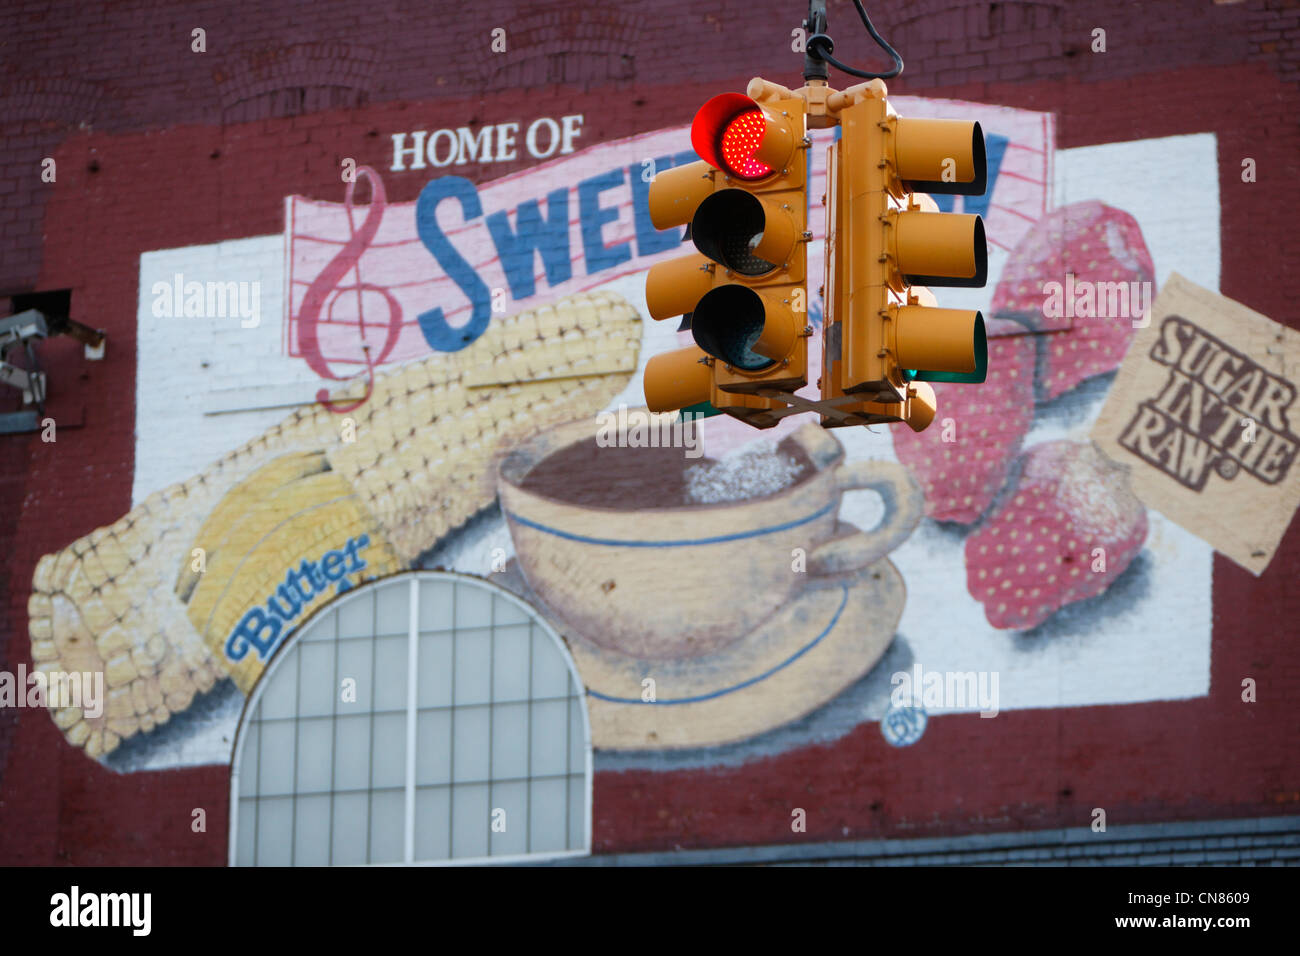 United States, New York City, Brooklyn, traffic light in front of a wall advertising Stock Photo